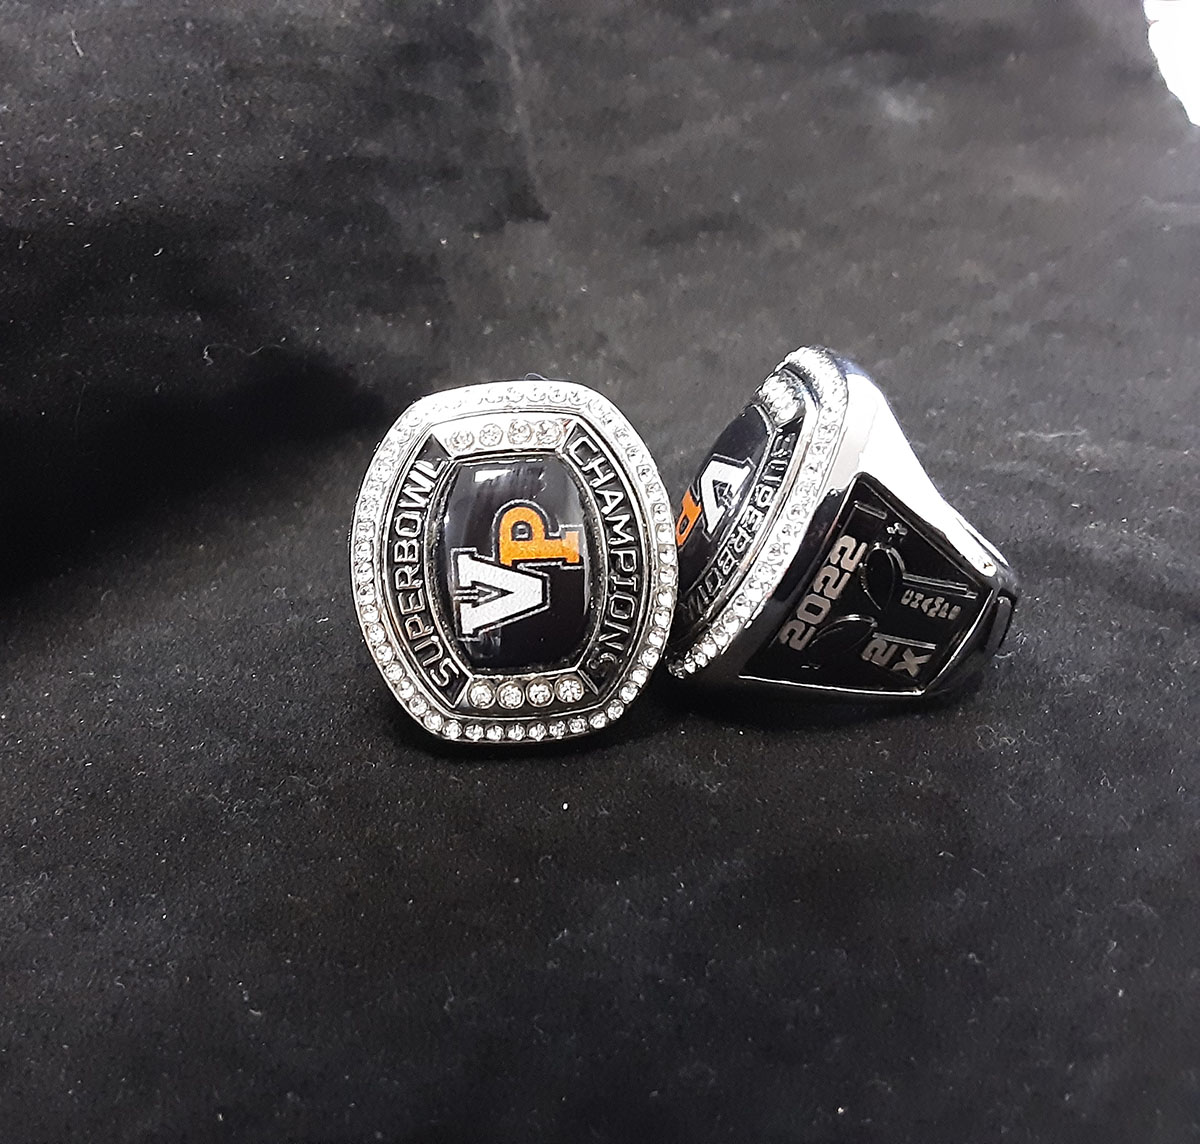 Crafting of the Golden State Warriors 2022 Championship Rings